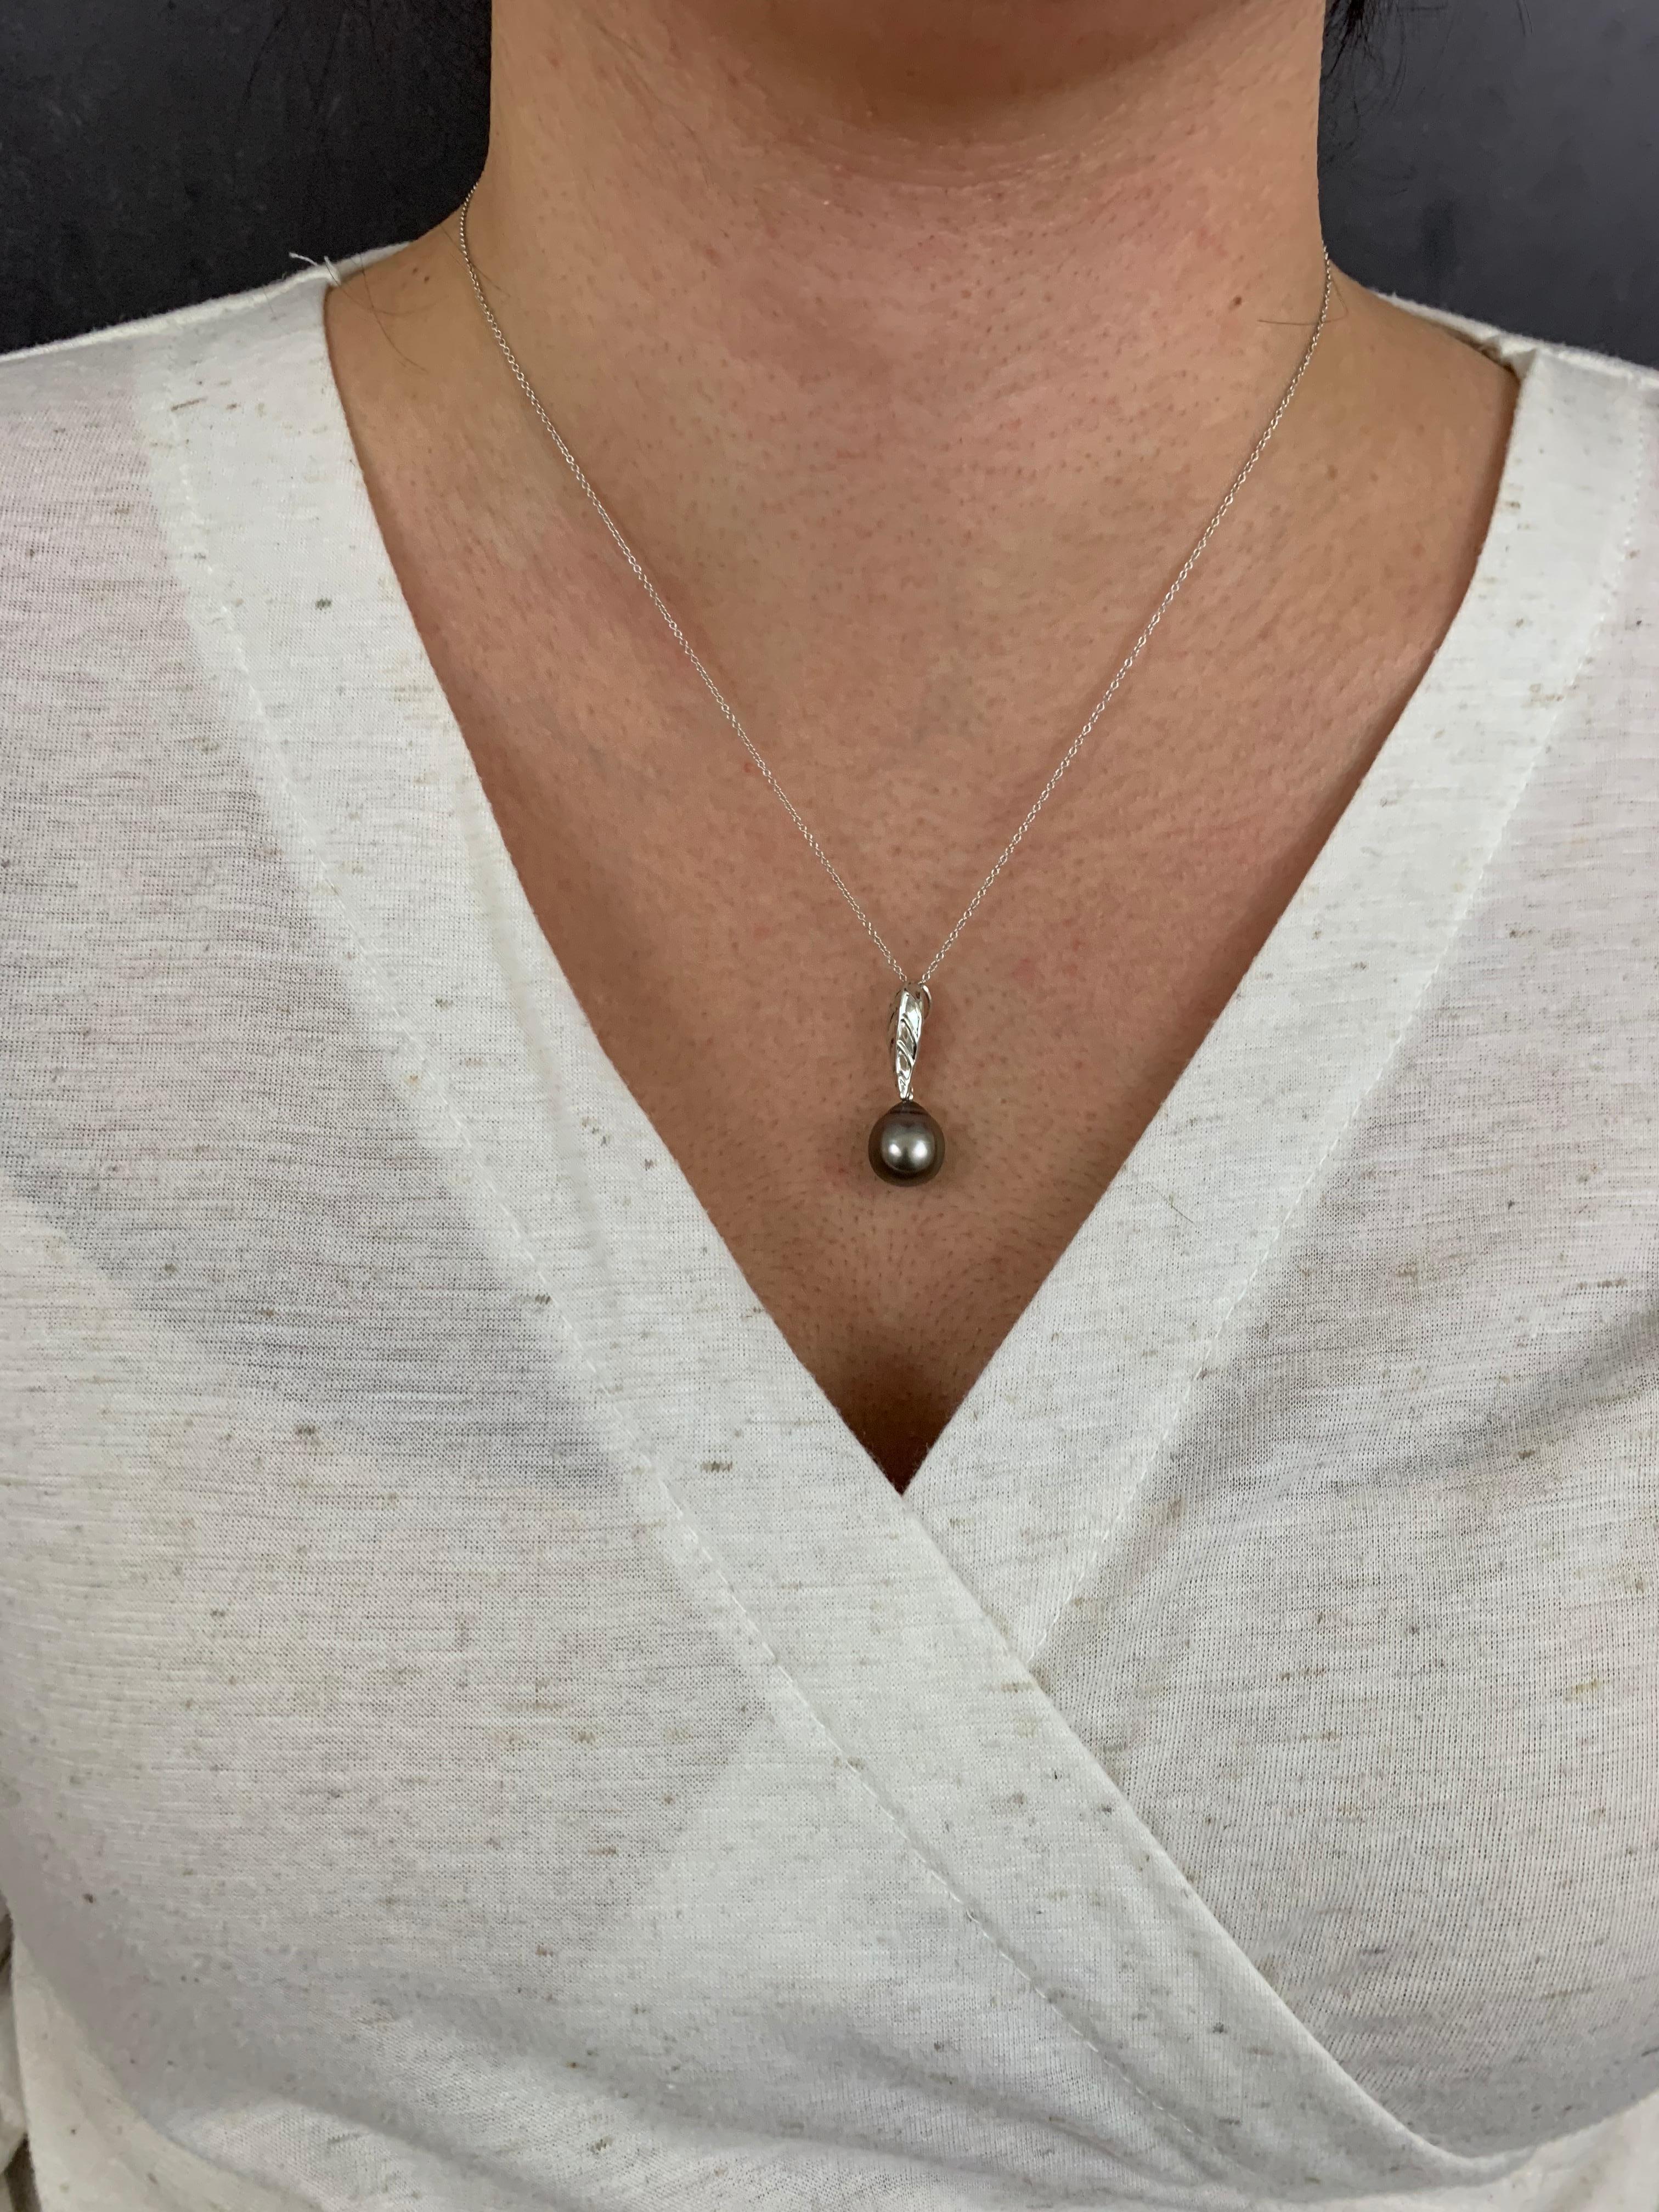 14K White Gold
1 Round Tahitian South Sea Pearl

Fine one-of-a-kind craftsmanship meets incredible quality in this breathtaking piece of jewelry. 

All pieces are made in the U.S.A and come with a lifetime warranty! 

Undeniably rare, colorfully